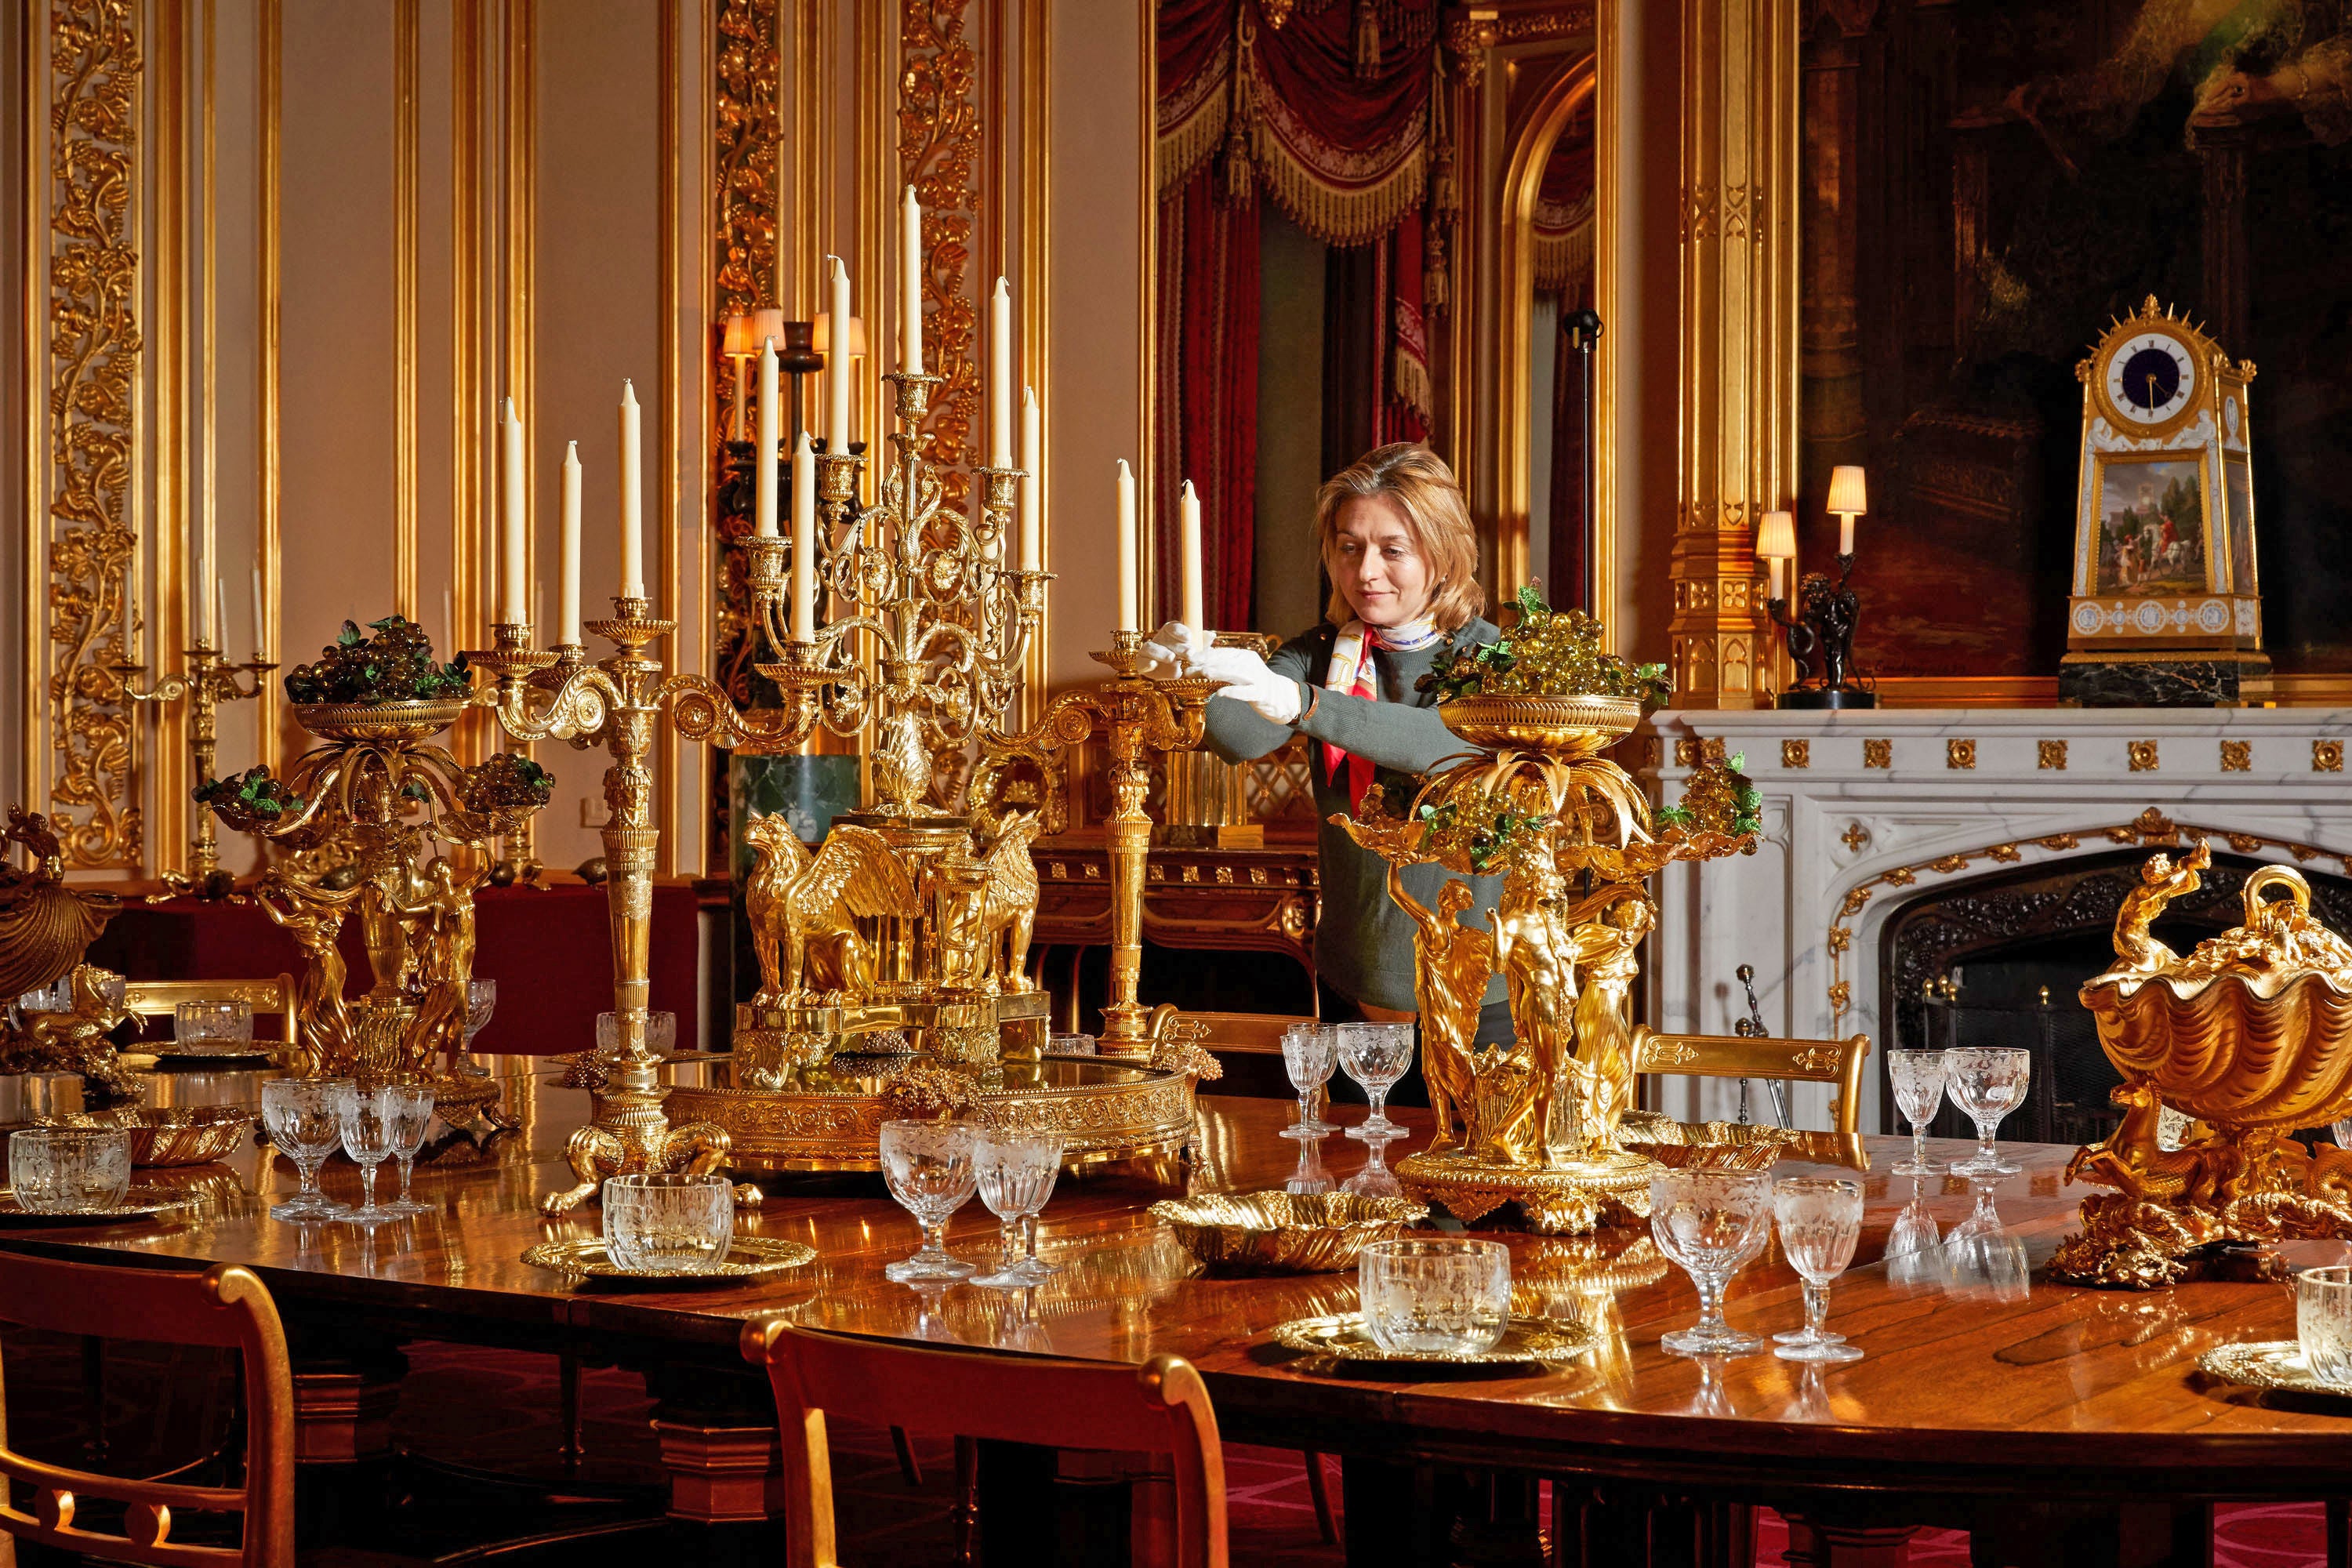 A Royal Collection Trust curator puts the finishing touches on a special display of the silver-gilt Grand Service in the State Dining Room at Windsor Castle